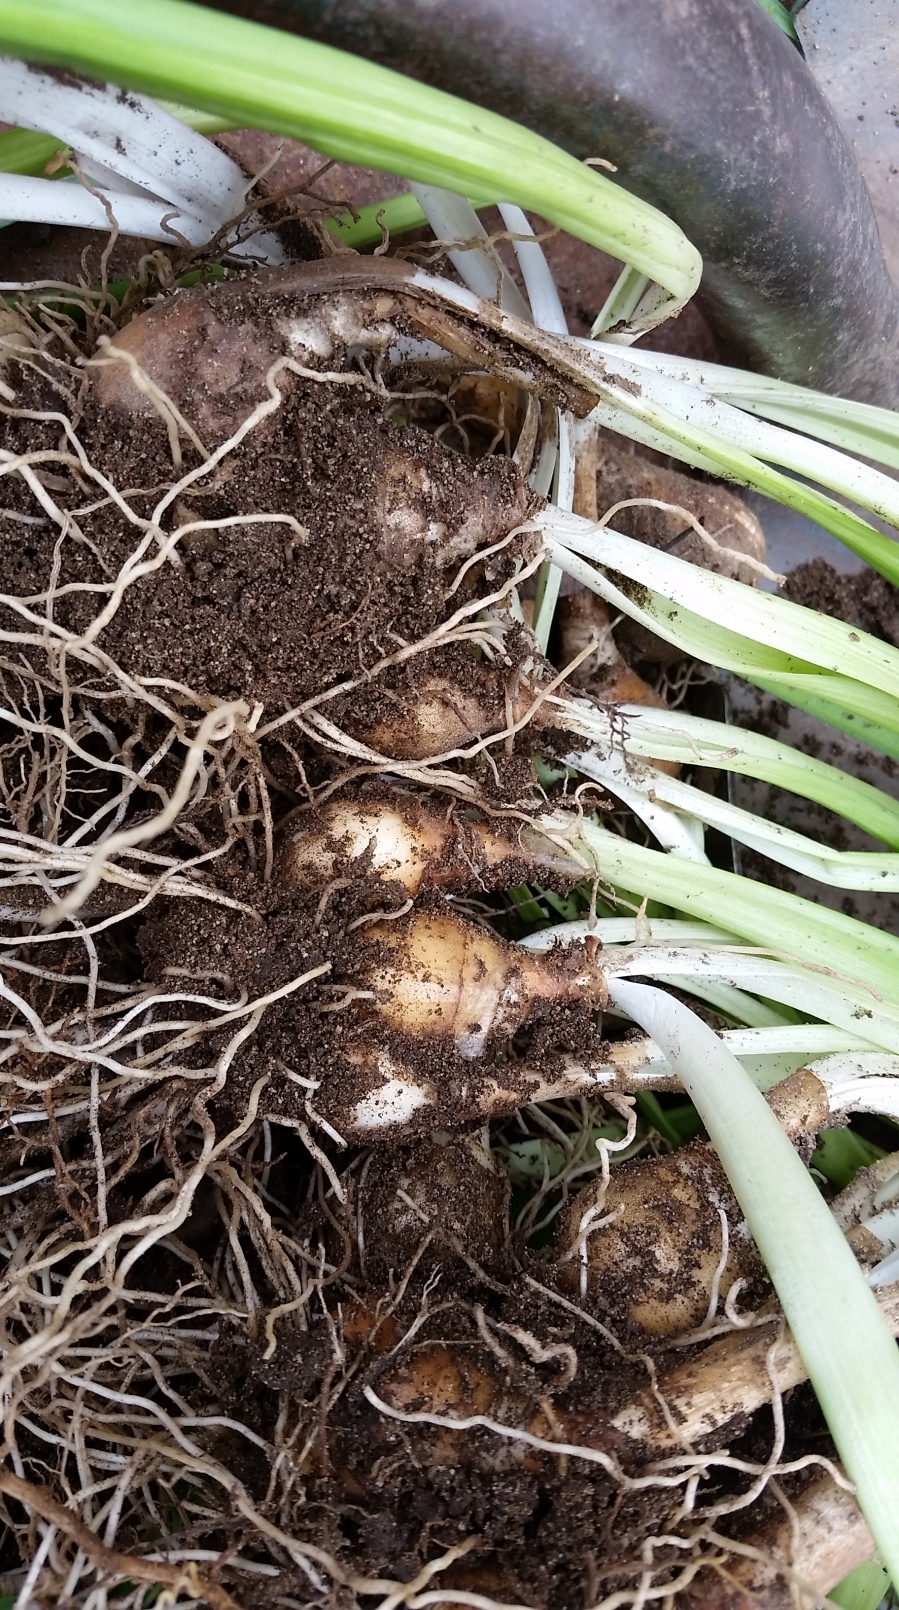 Just some of the daffodil bulbs I dug up and found new homes for in the spring.